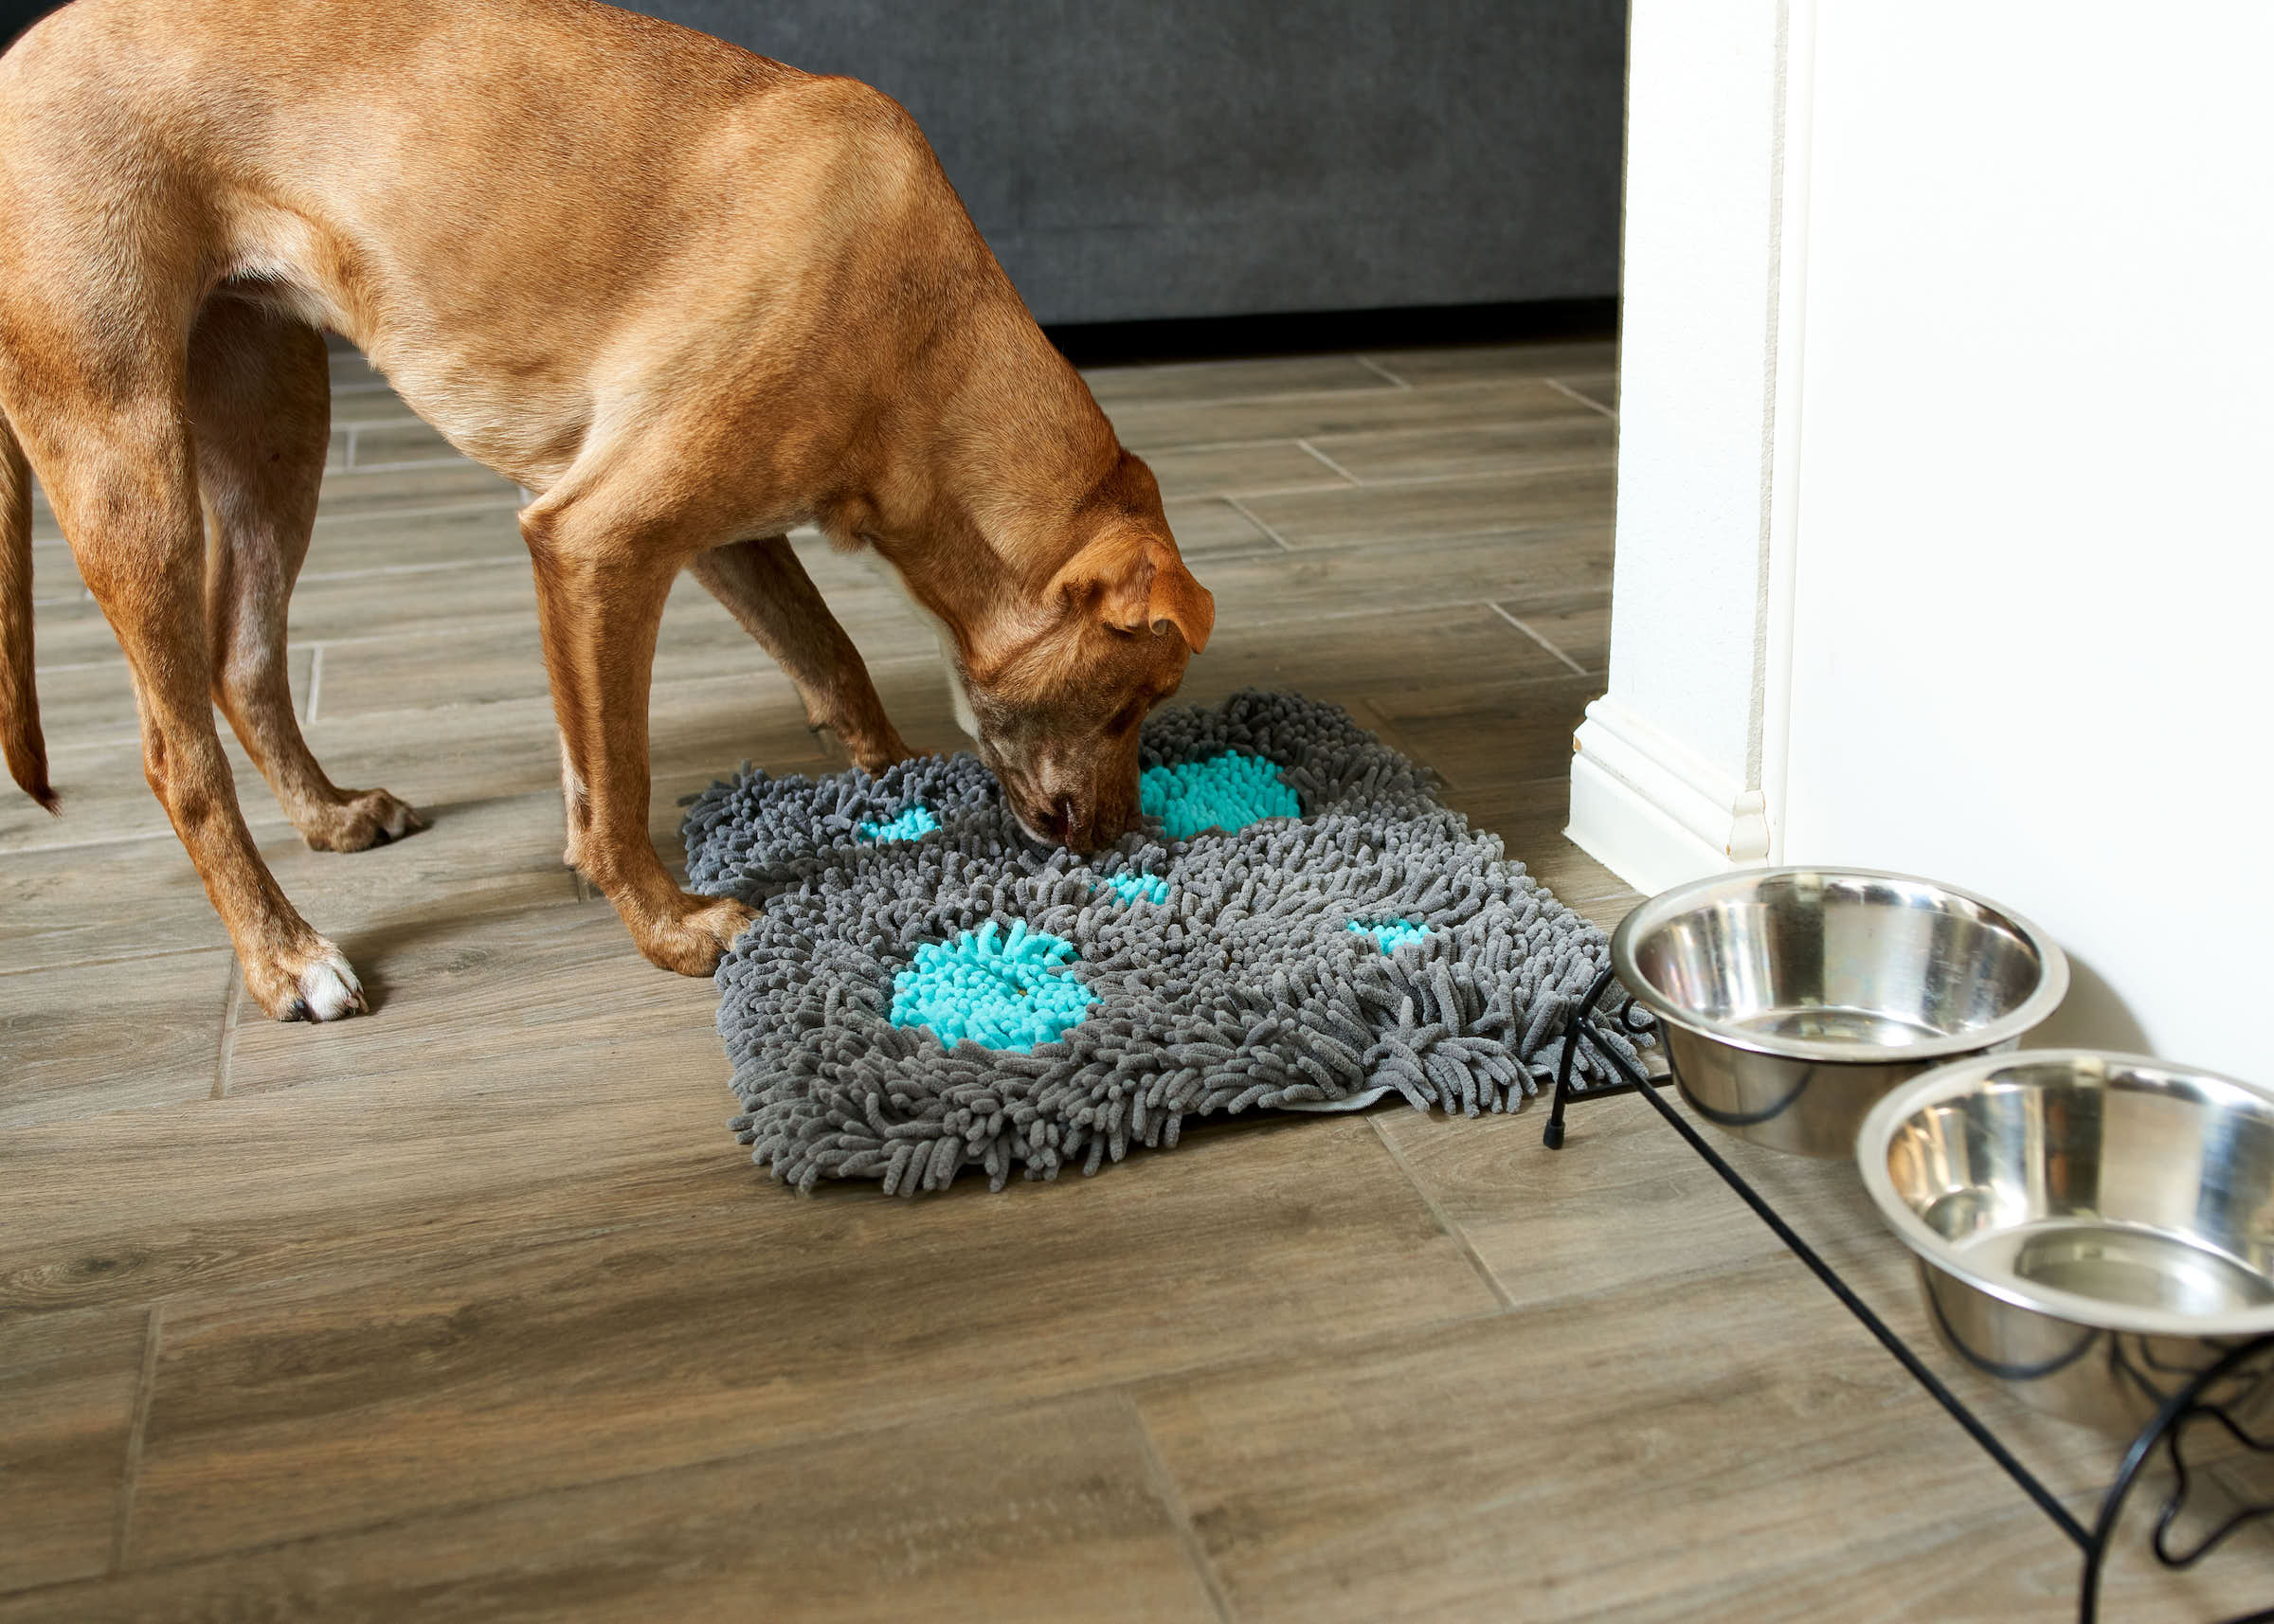 Snuffle Mat vs. Slow Feeder Dog Bowl: Which is Better?